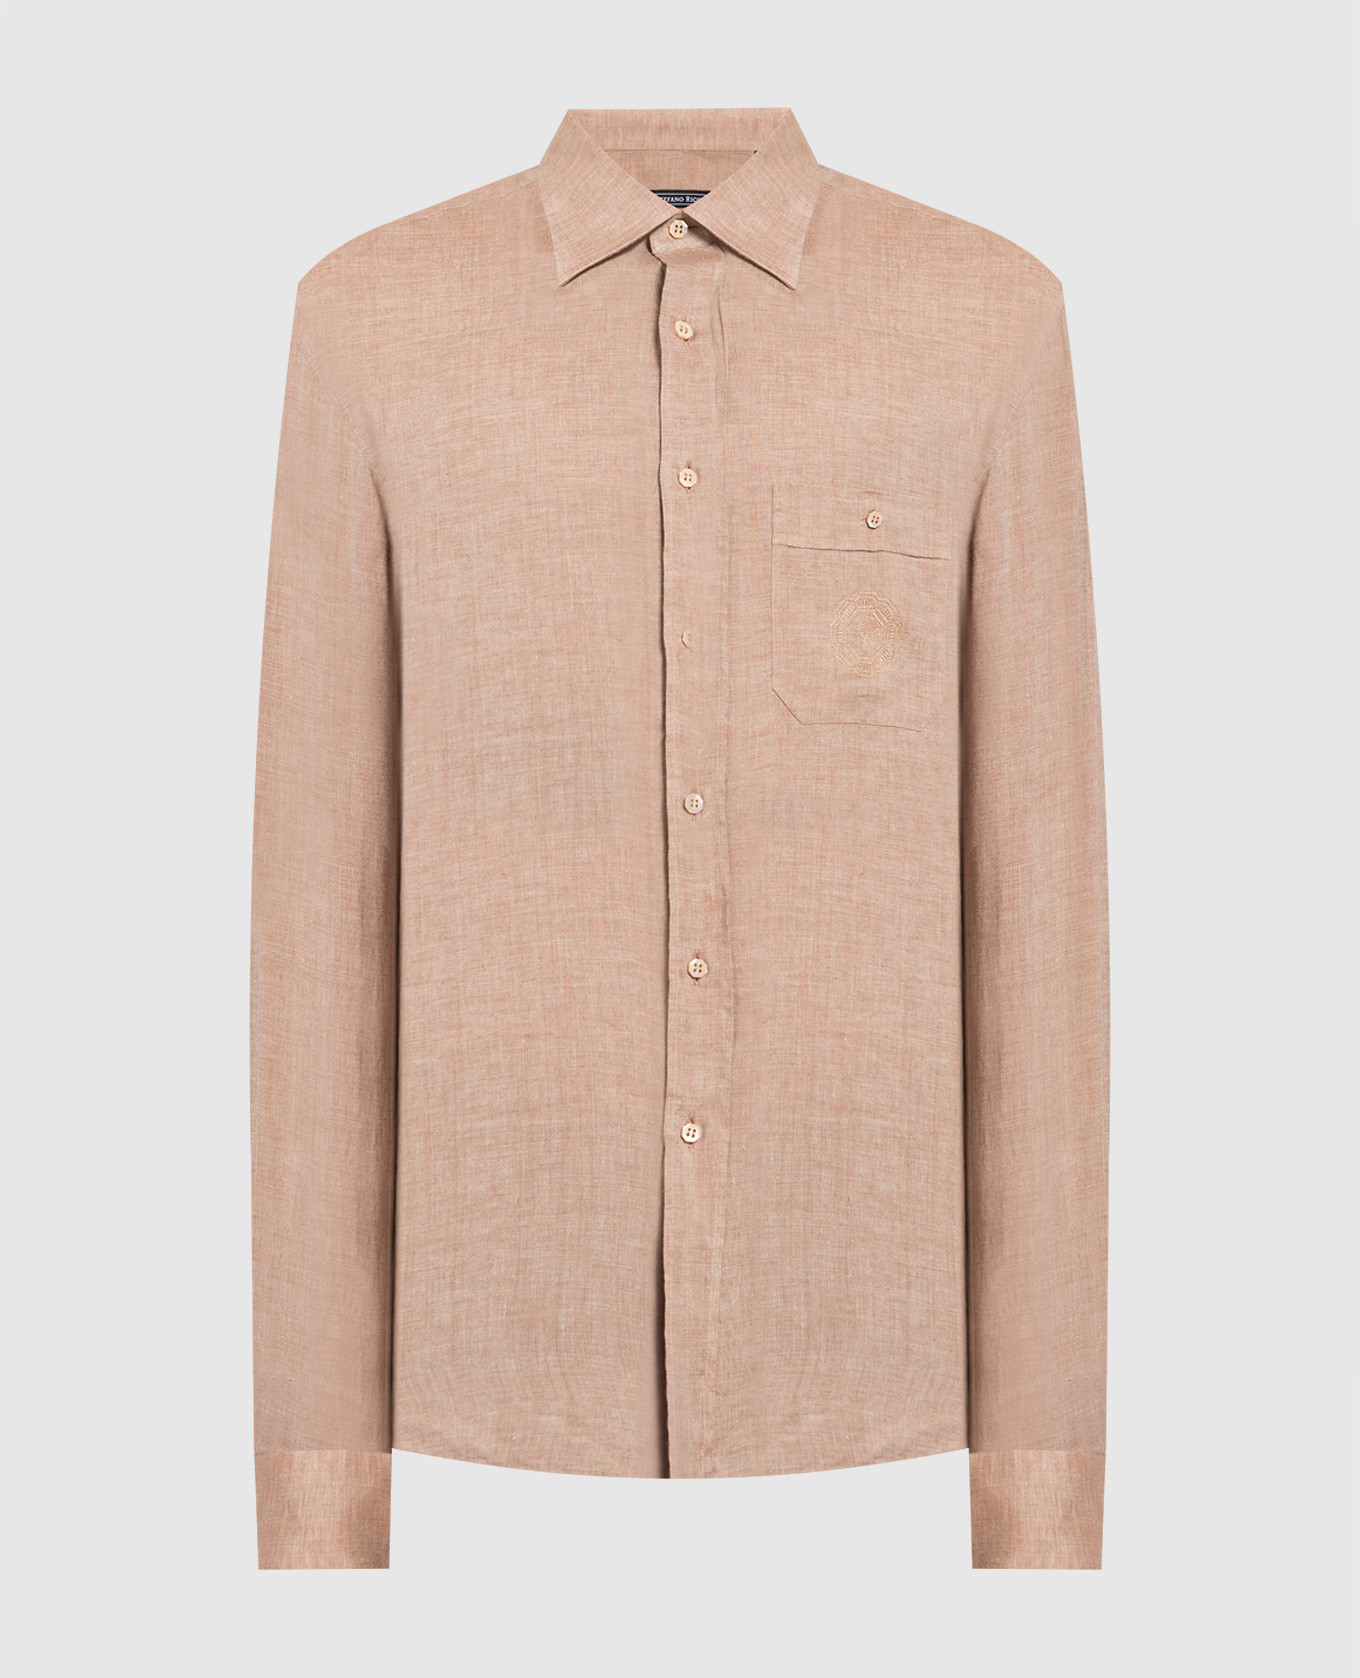 Stefano Ricci - Brown linen shirt with logo embroidery MC006731LX2330 ...